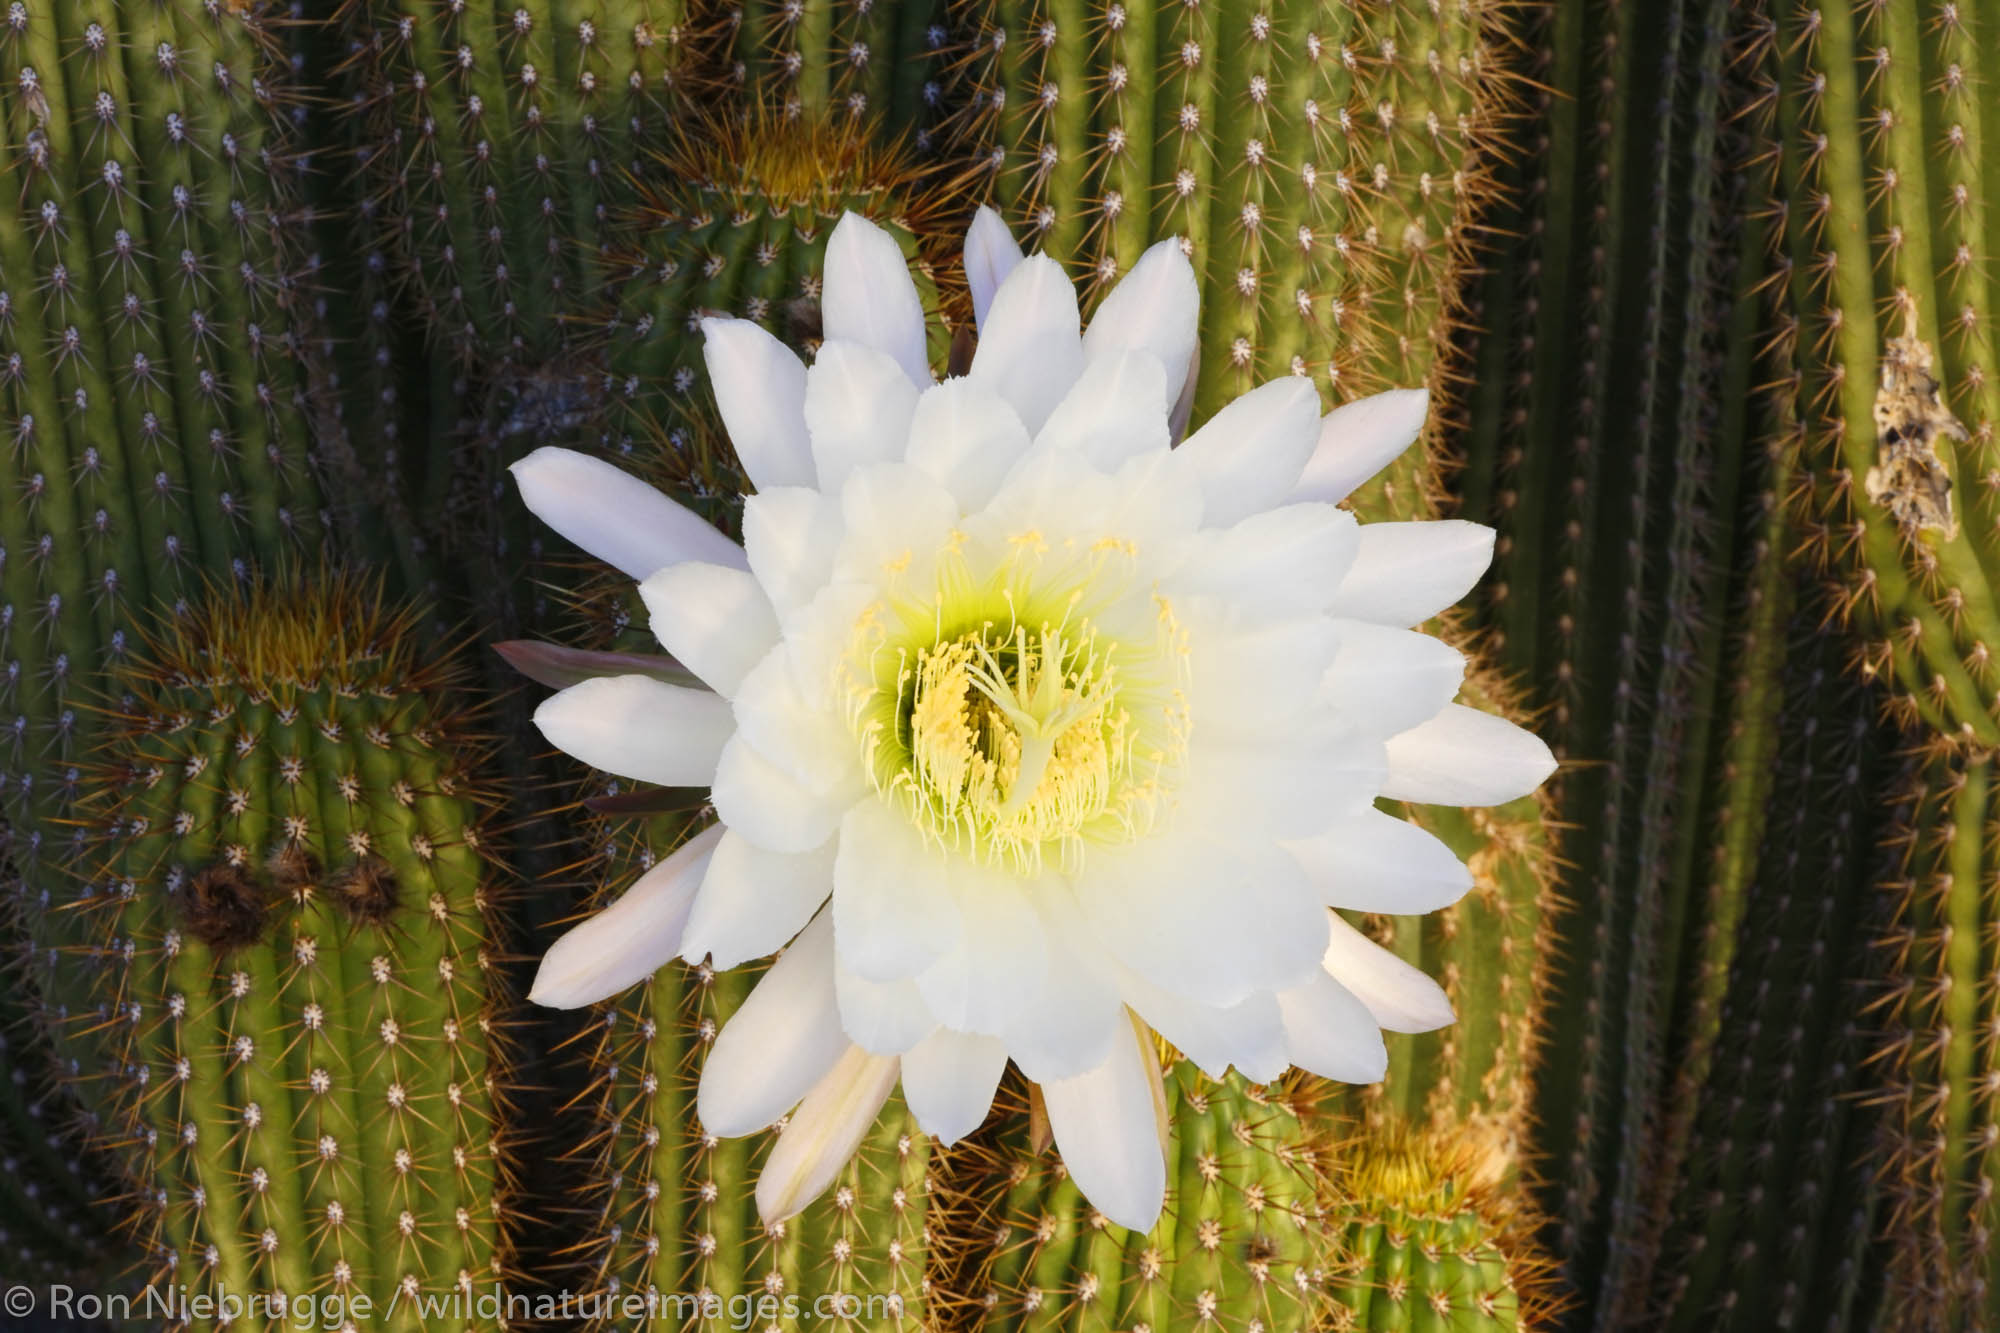 Night Blooming Cactus.  This cactus blooms at night and the flower lasts only one day. Pioneertown, Mojave Desert, California...